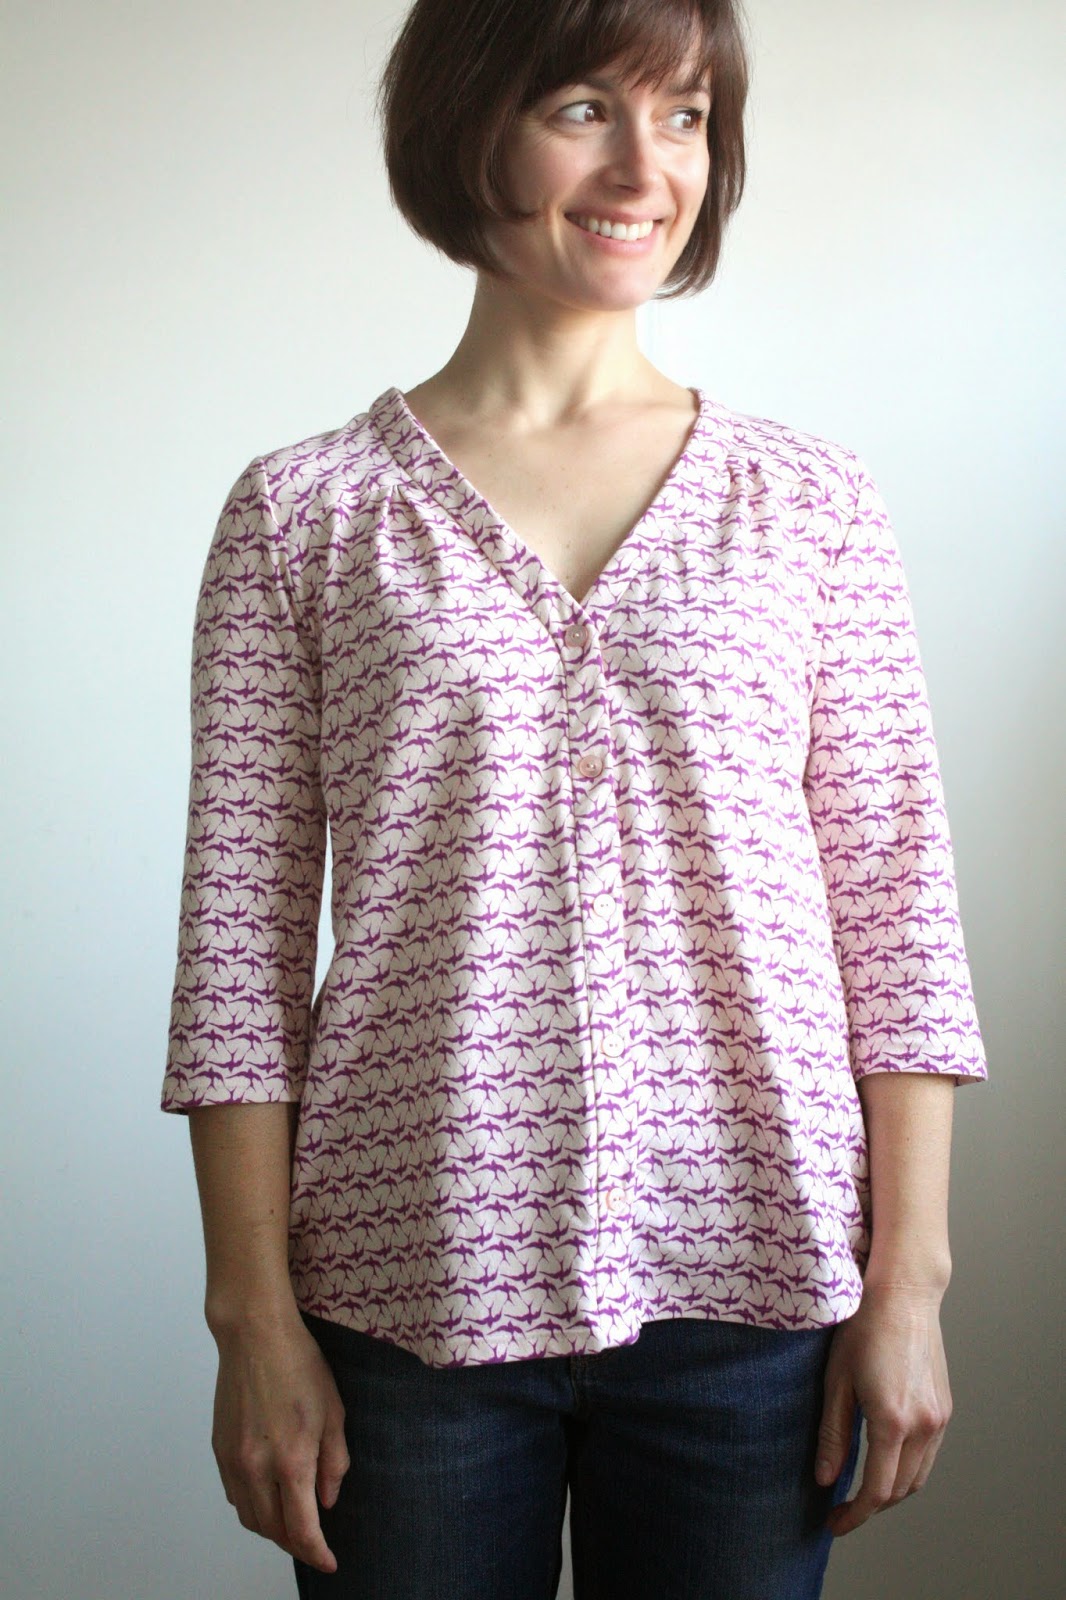 Nicole at Home: Camas Blouse by Thread Theory